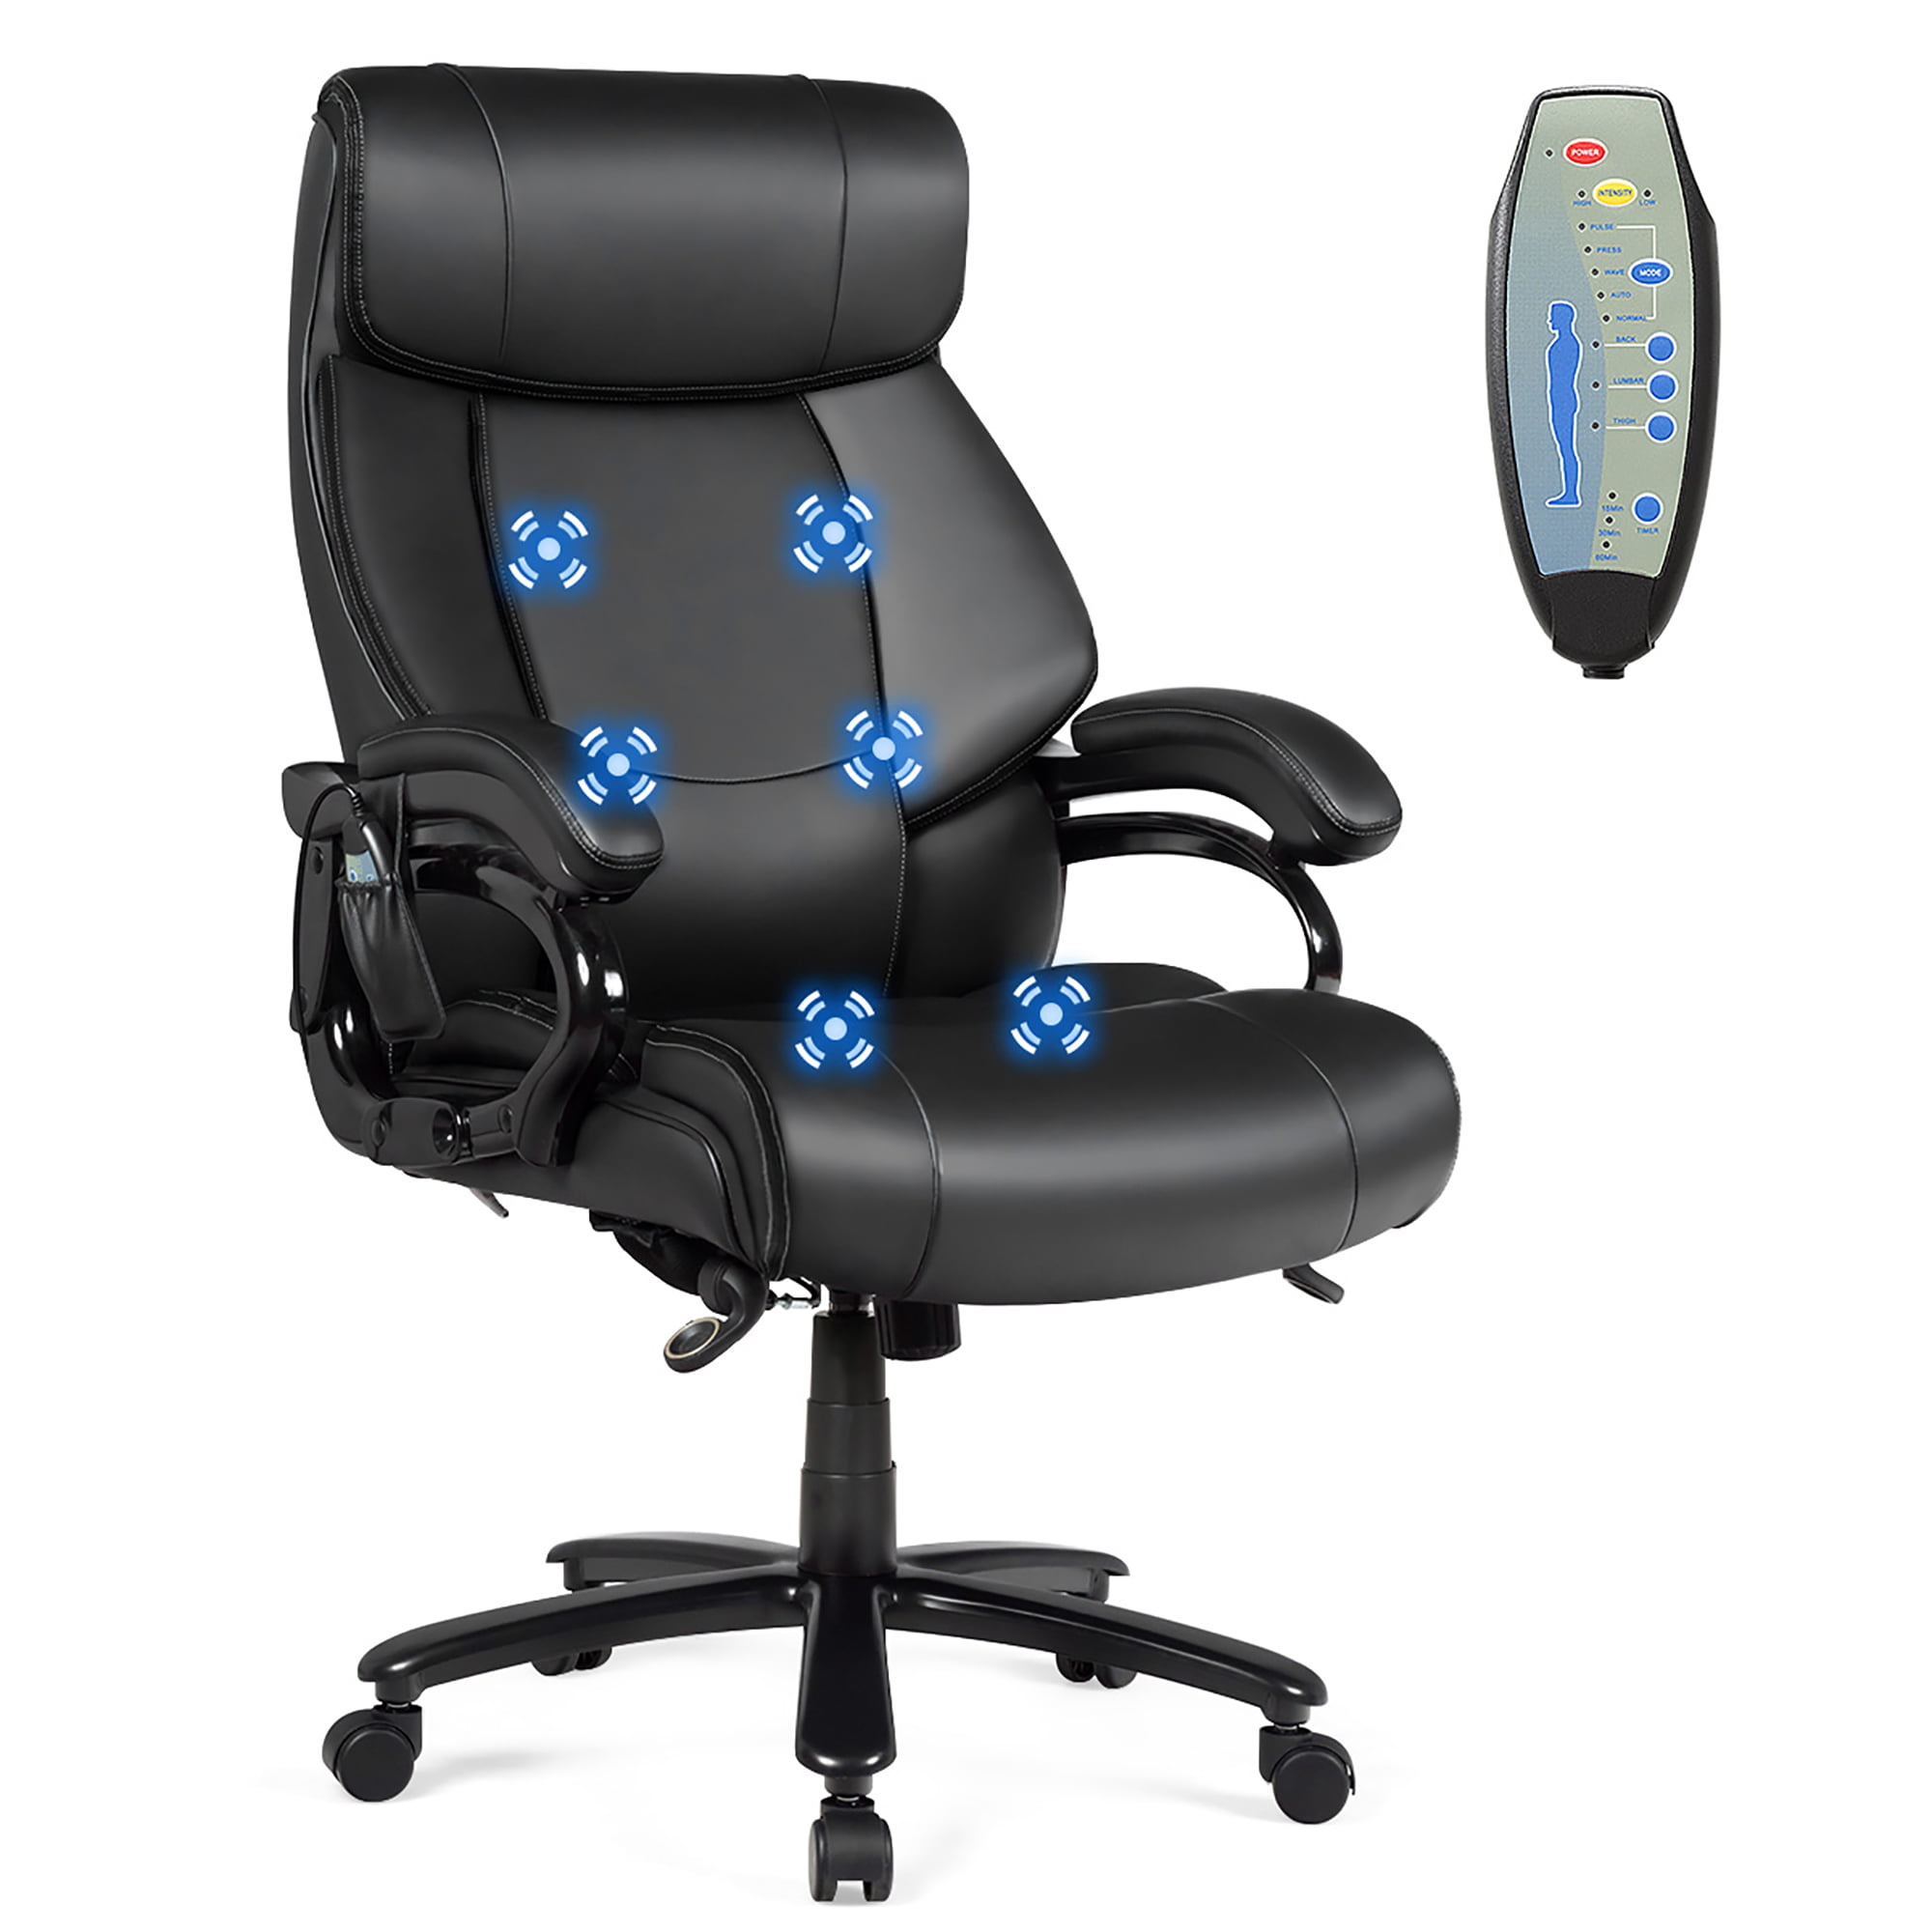 High-back Big and Tall Office Chair PU Leather Executive Chair Massage Function 